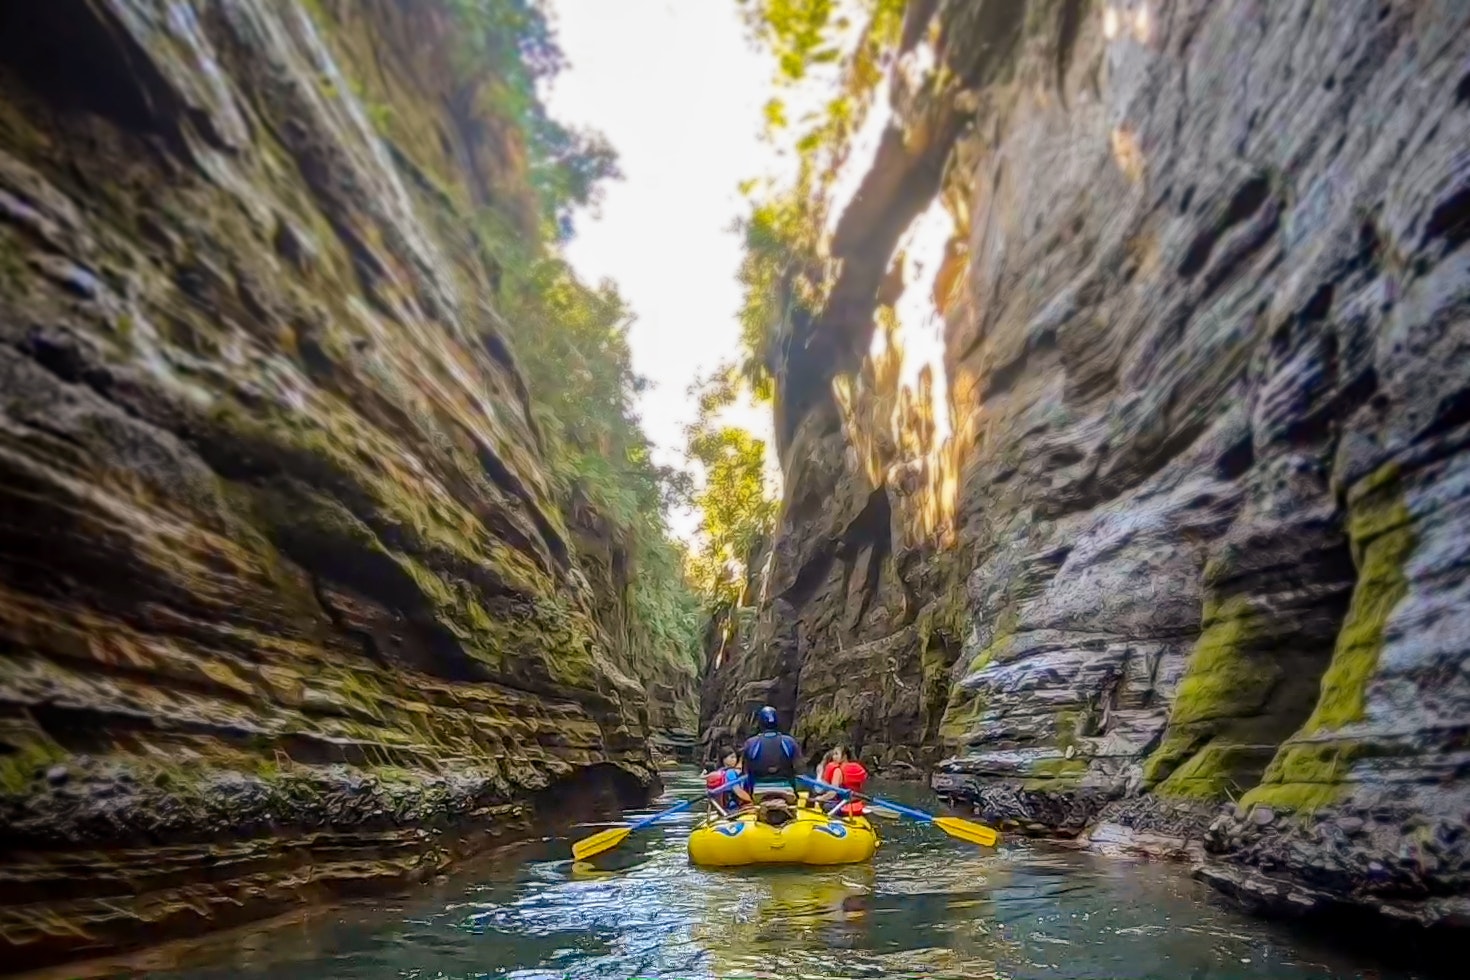 A yellow inflated raft filled with people wearing helmets, life jackets and carrying paddles, travels down a waterway along side two massive rock formations